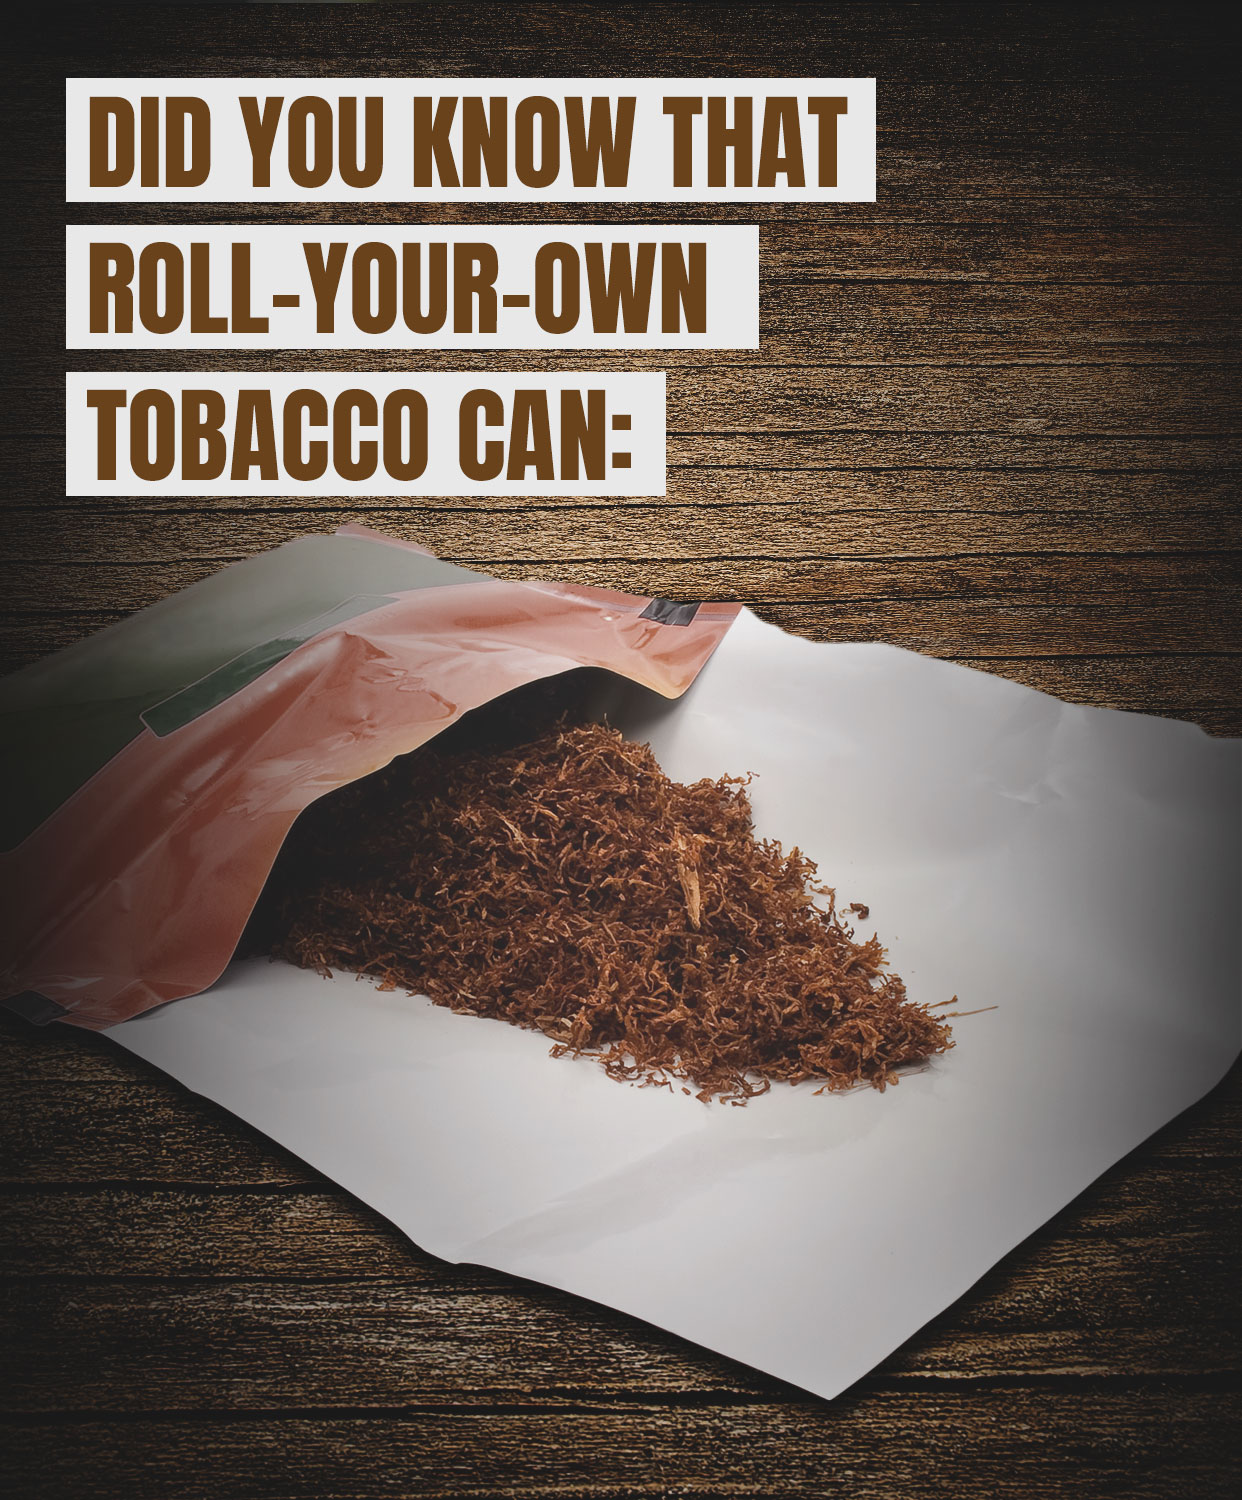 Did you know that Roll-Your-Own tobacco can